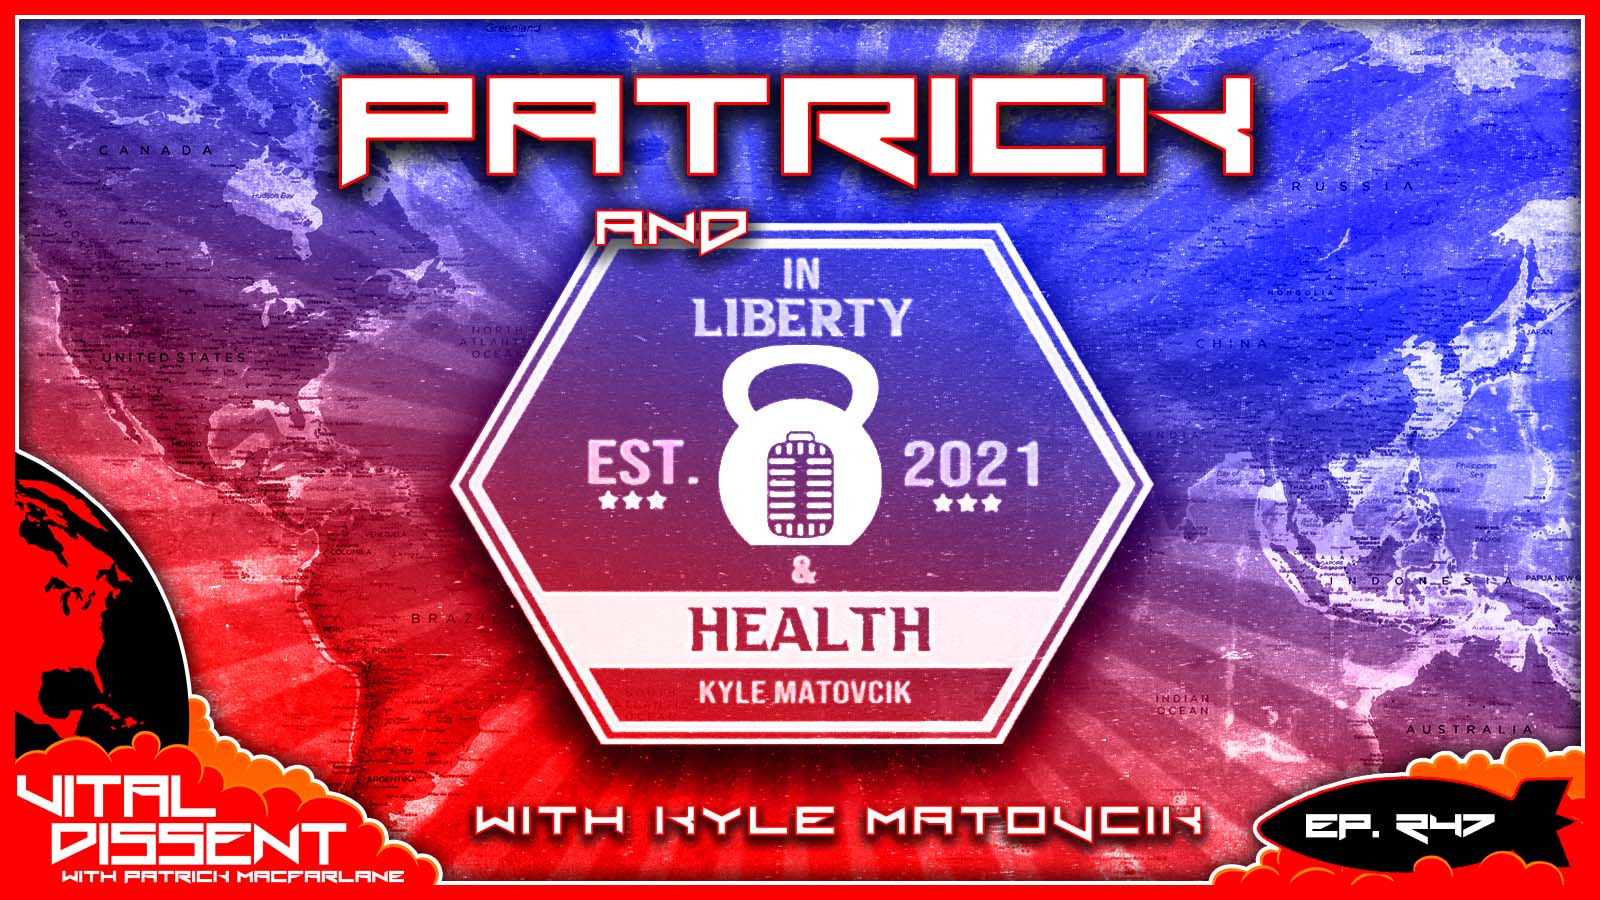 Patrick and In Liberty and Health with Kyle Matovcik Ep. 247